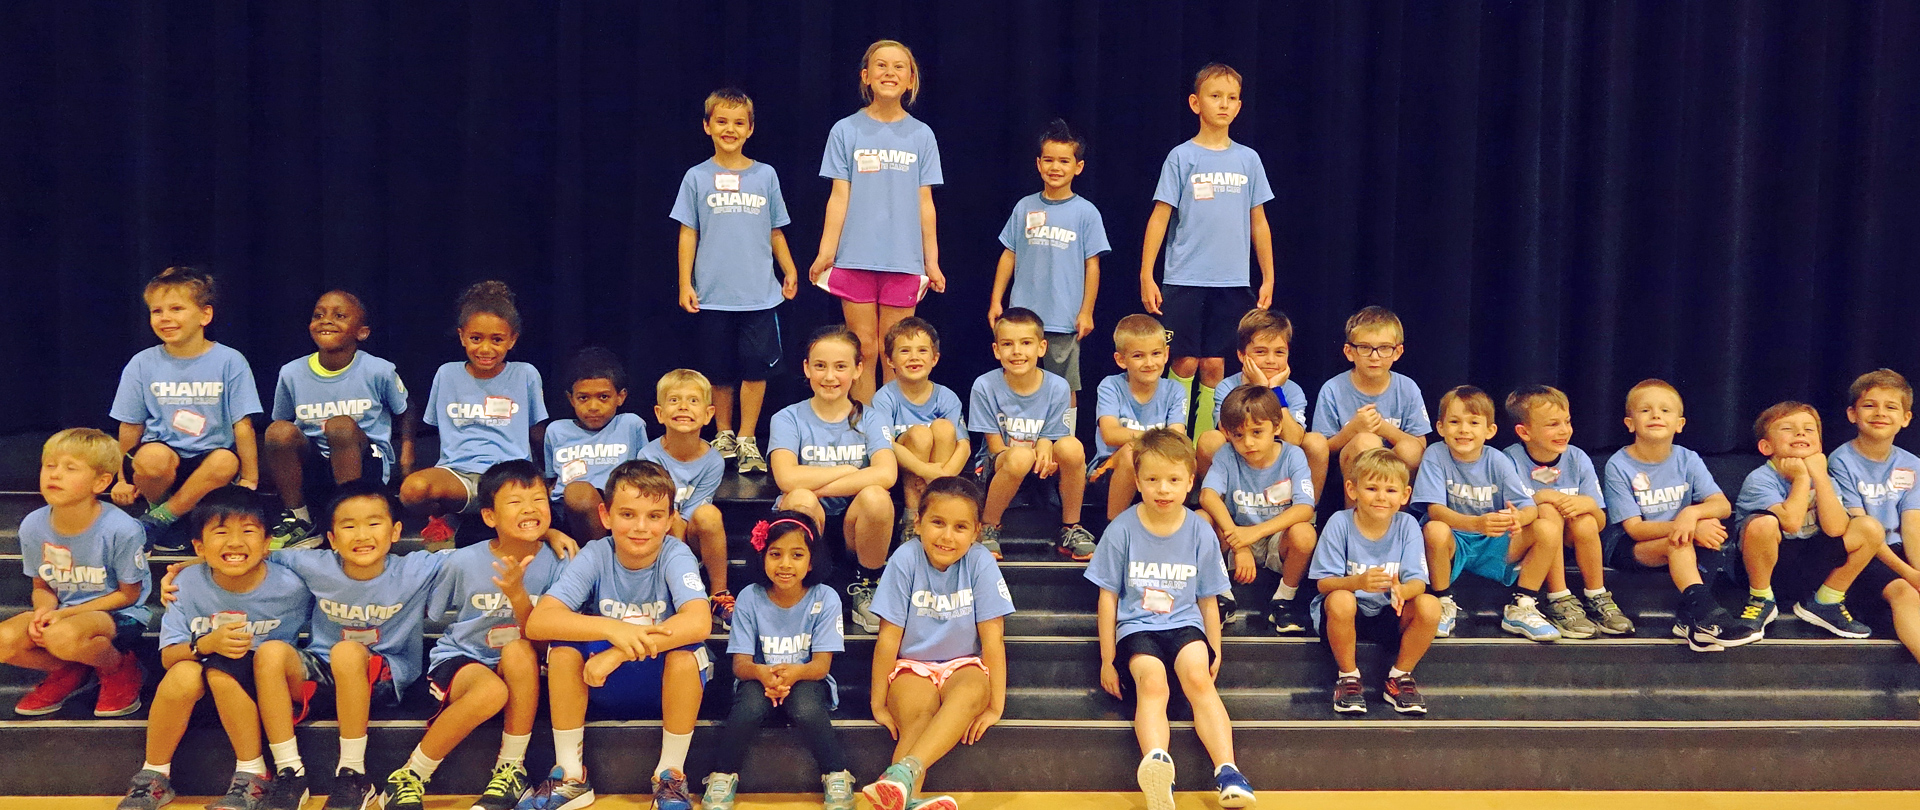 CHAMP Summer Basketball Camp
Boys & Girls, Ages 5–8
Camp is full! Waitlist available
